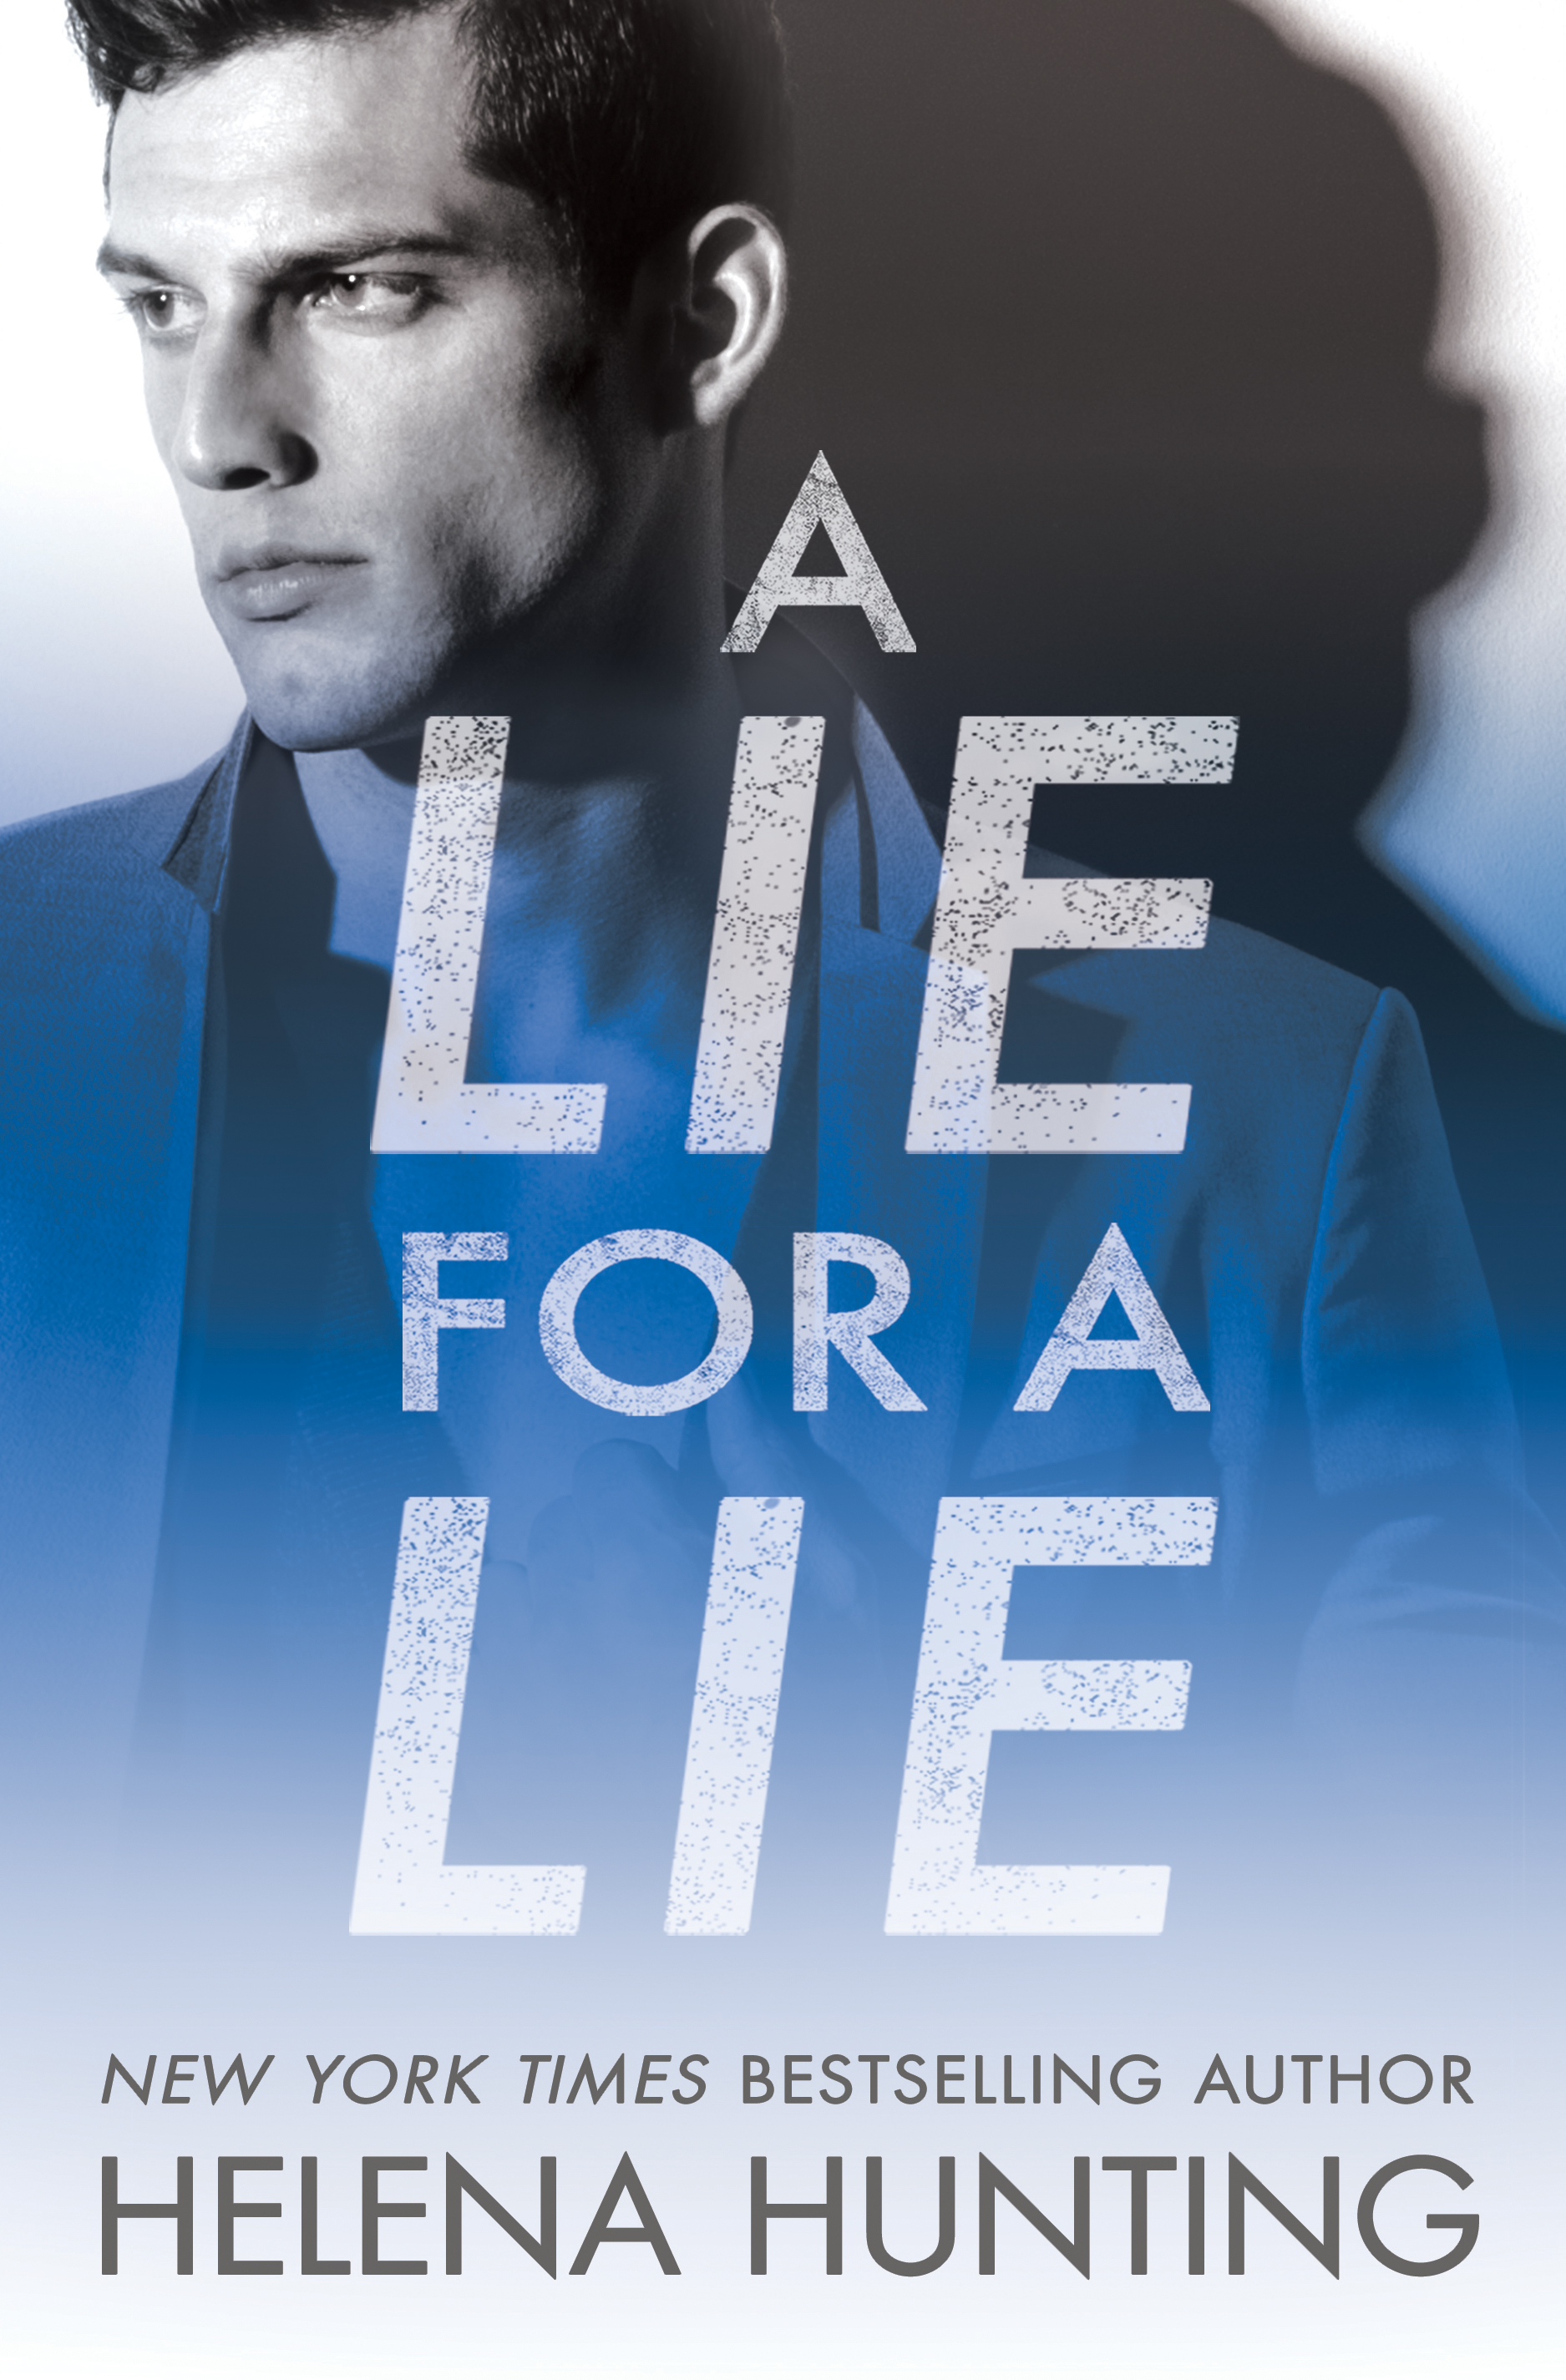 A Lie for A Lie by #HelenaHunting [Blog Tour]